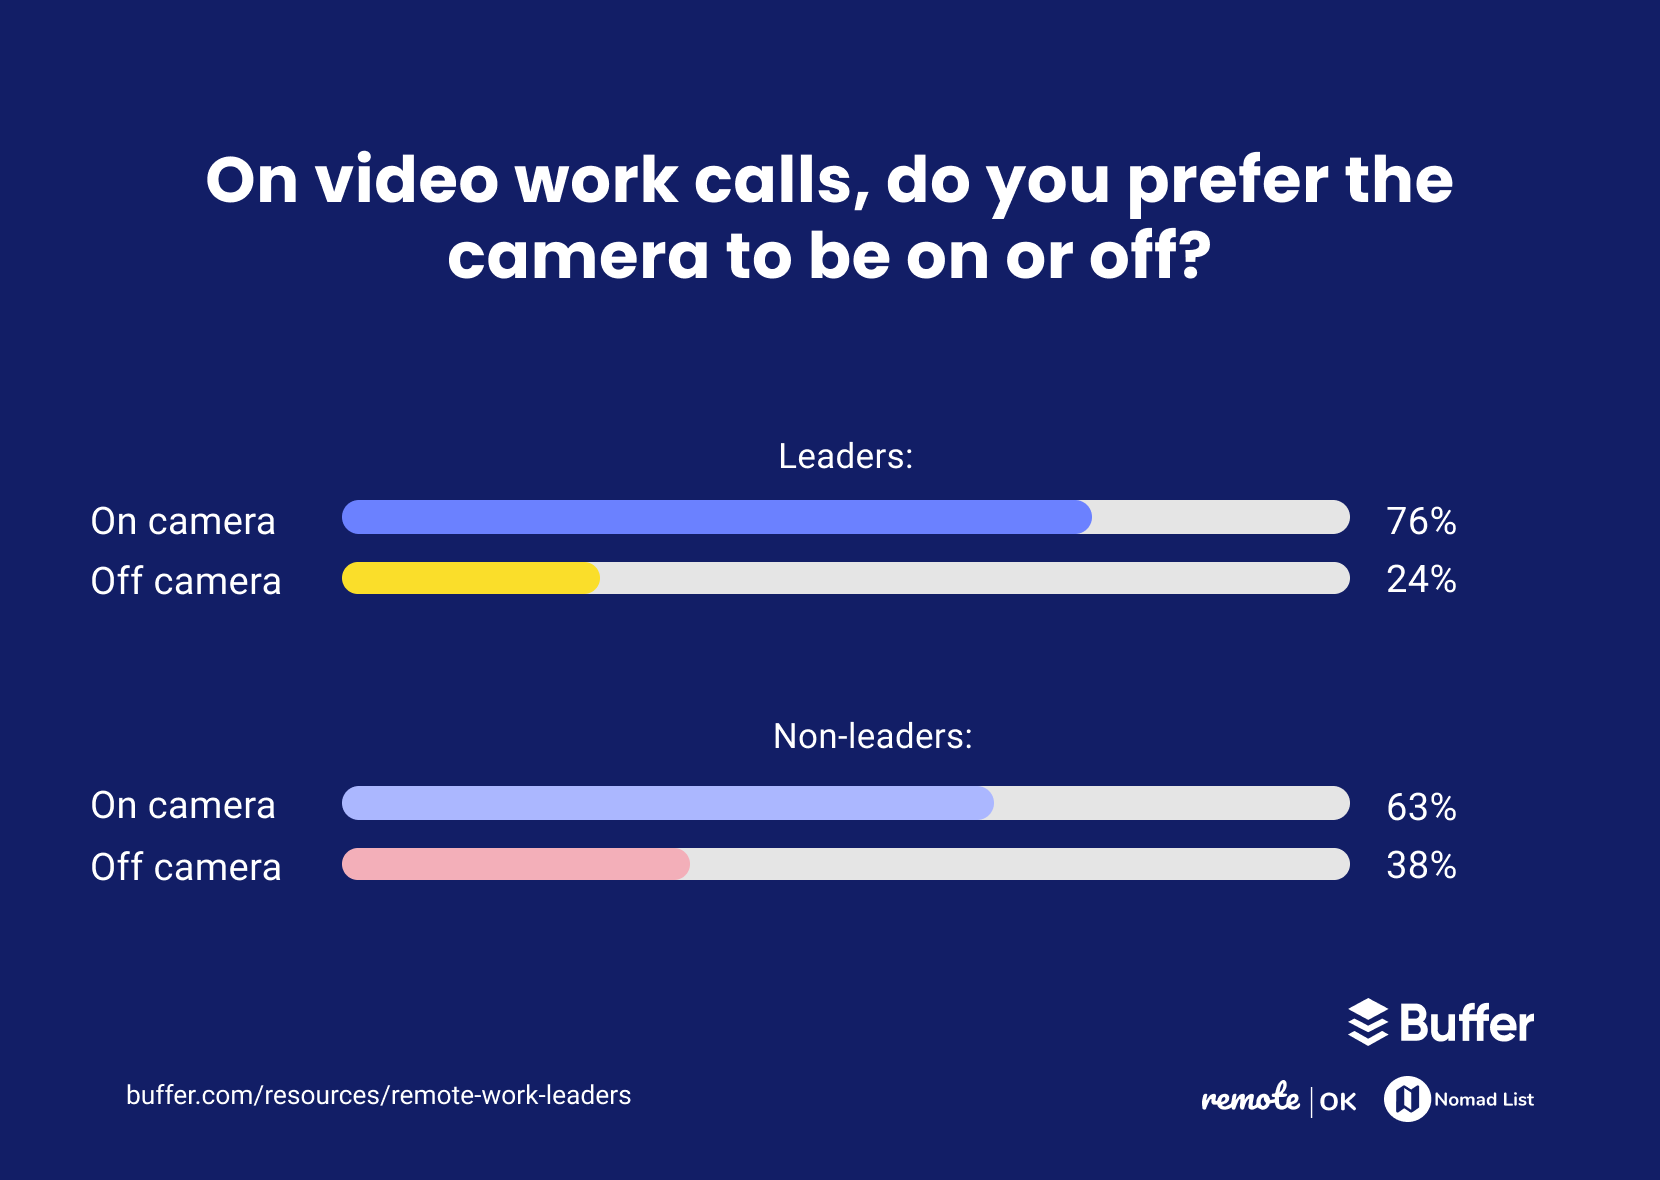 VideoCalls - How Are Leaders Experiencing Remote Work?